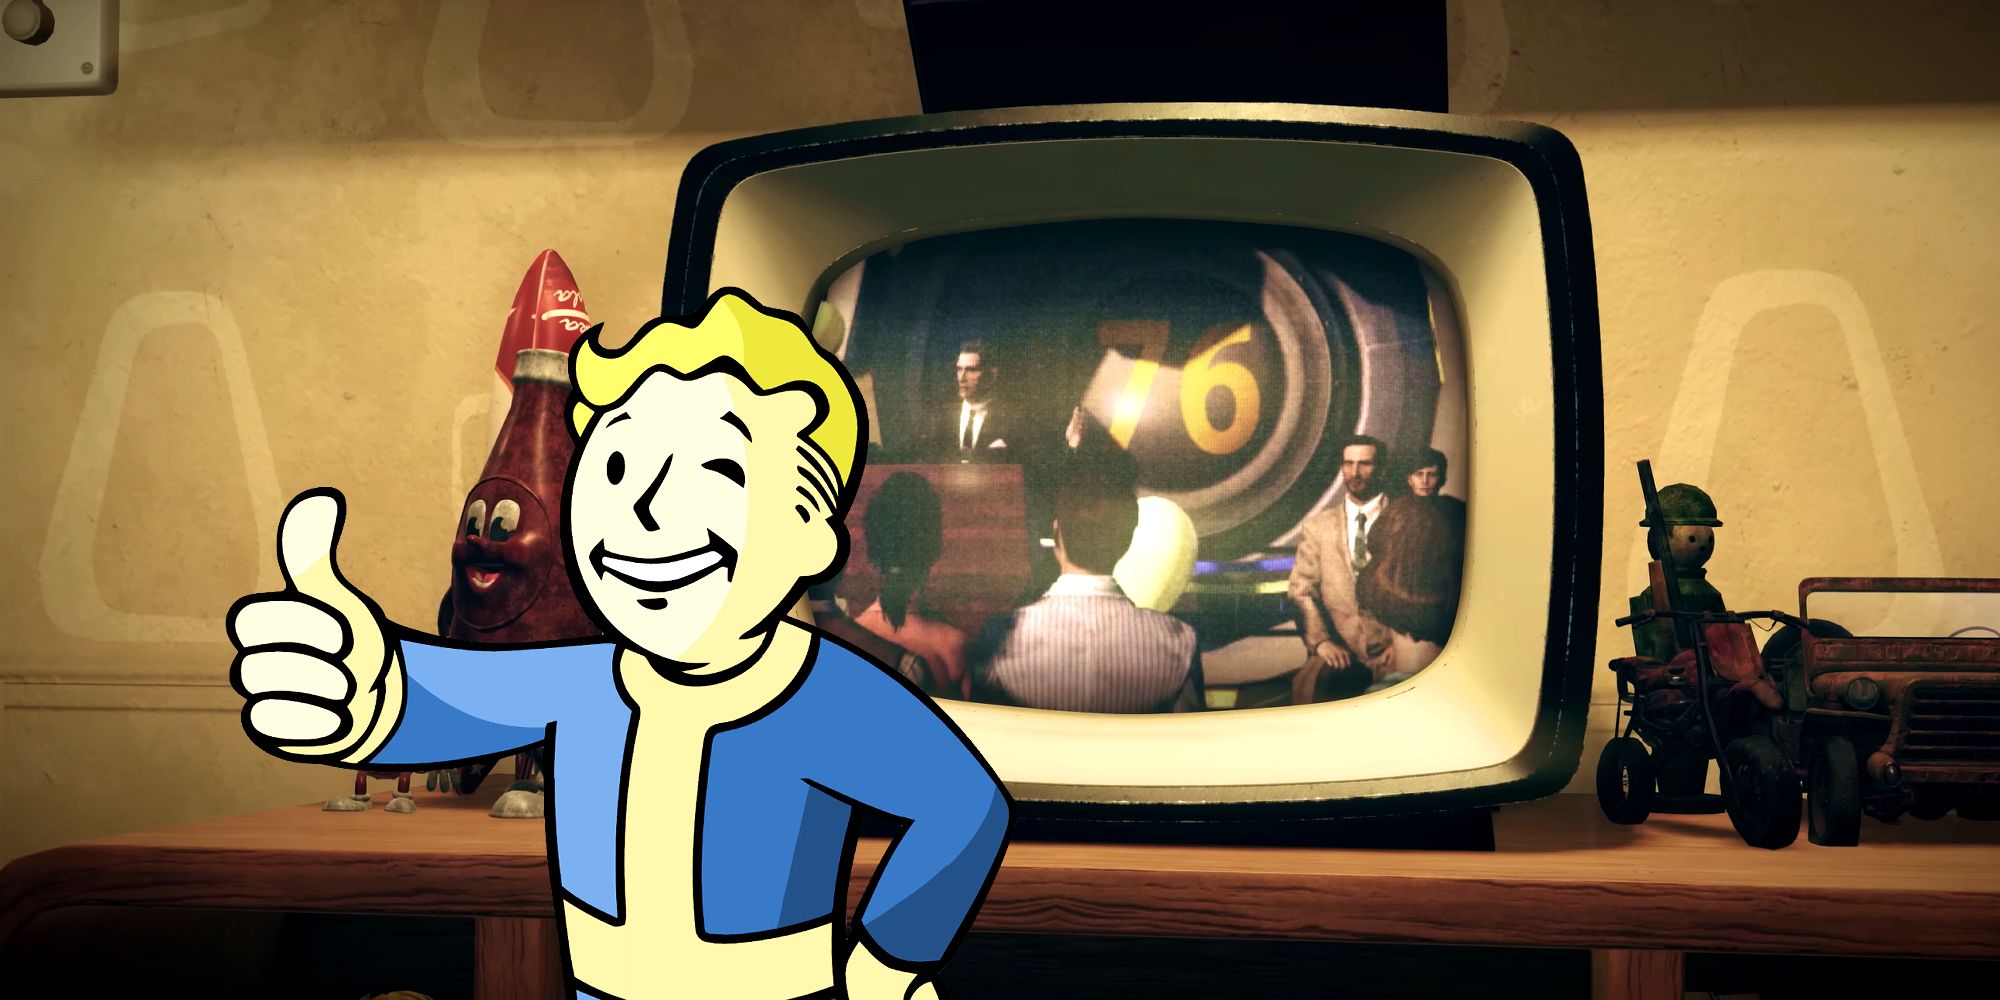 Screenshot of Fallout 76's Official Trailer of an in-game TV playing an announcement with an image of a Vault Boy overlayed.